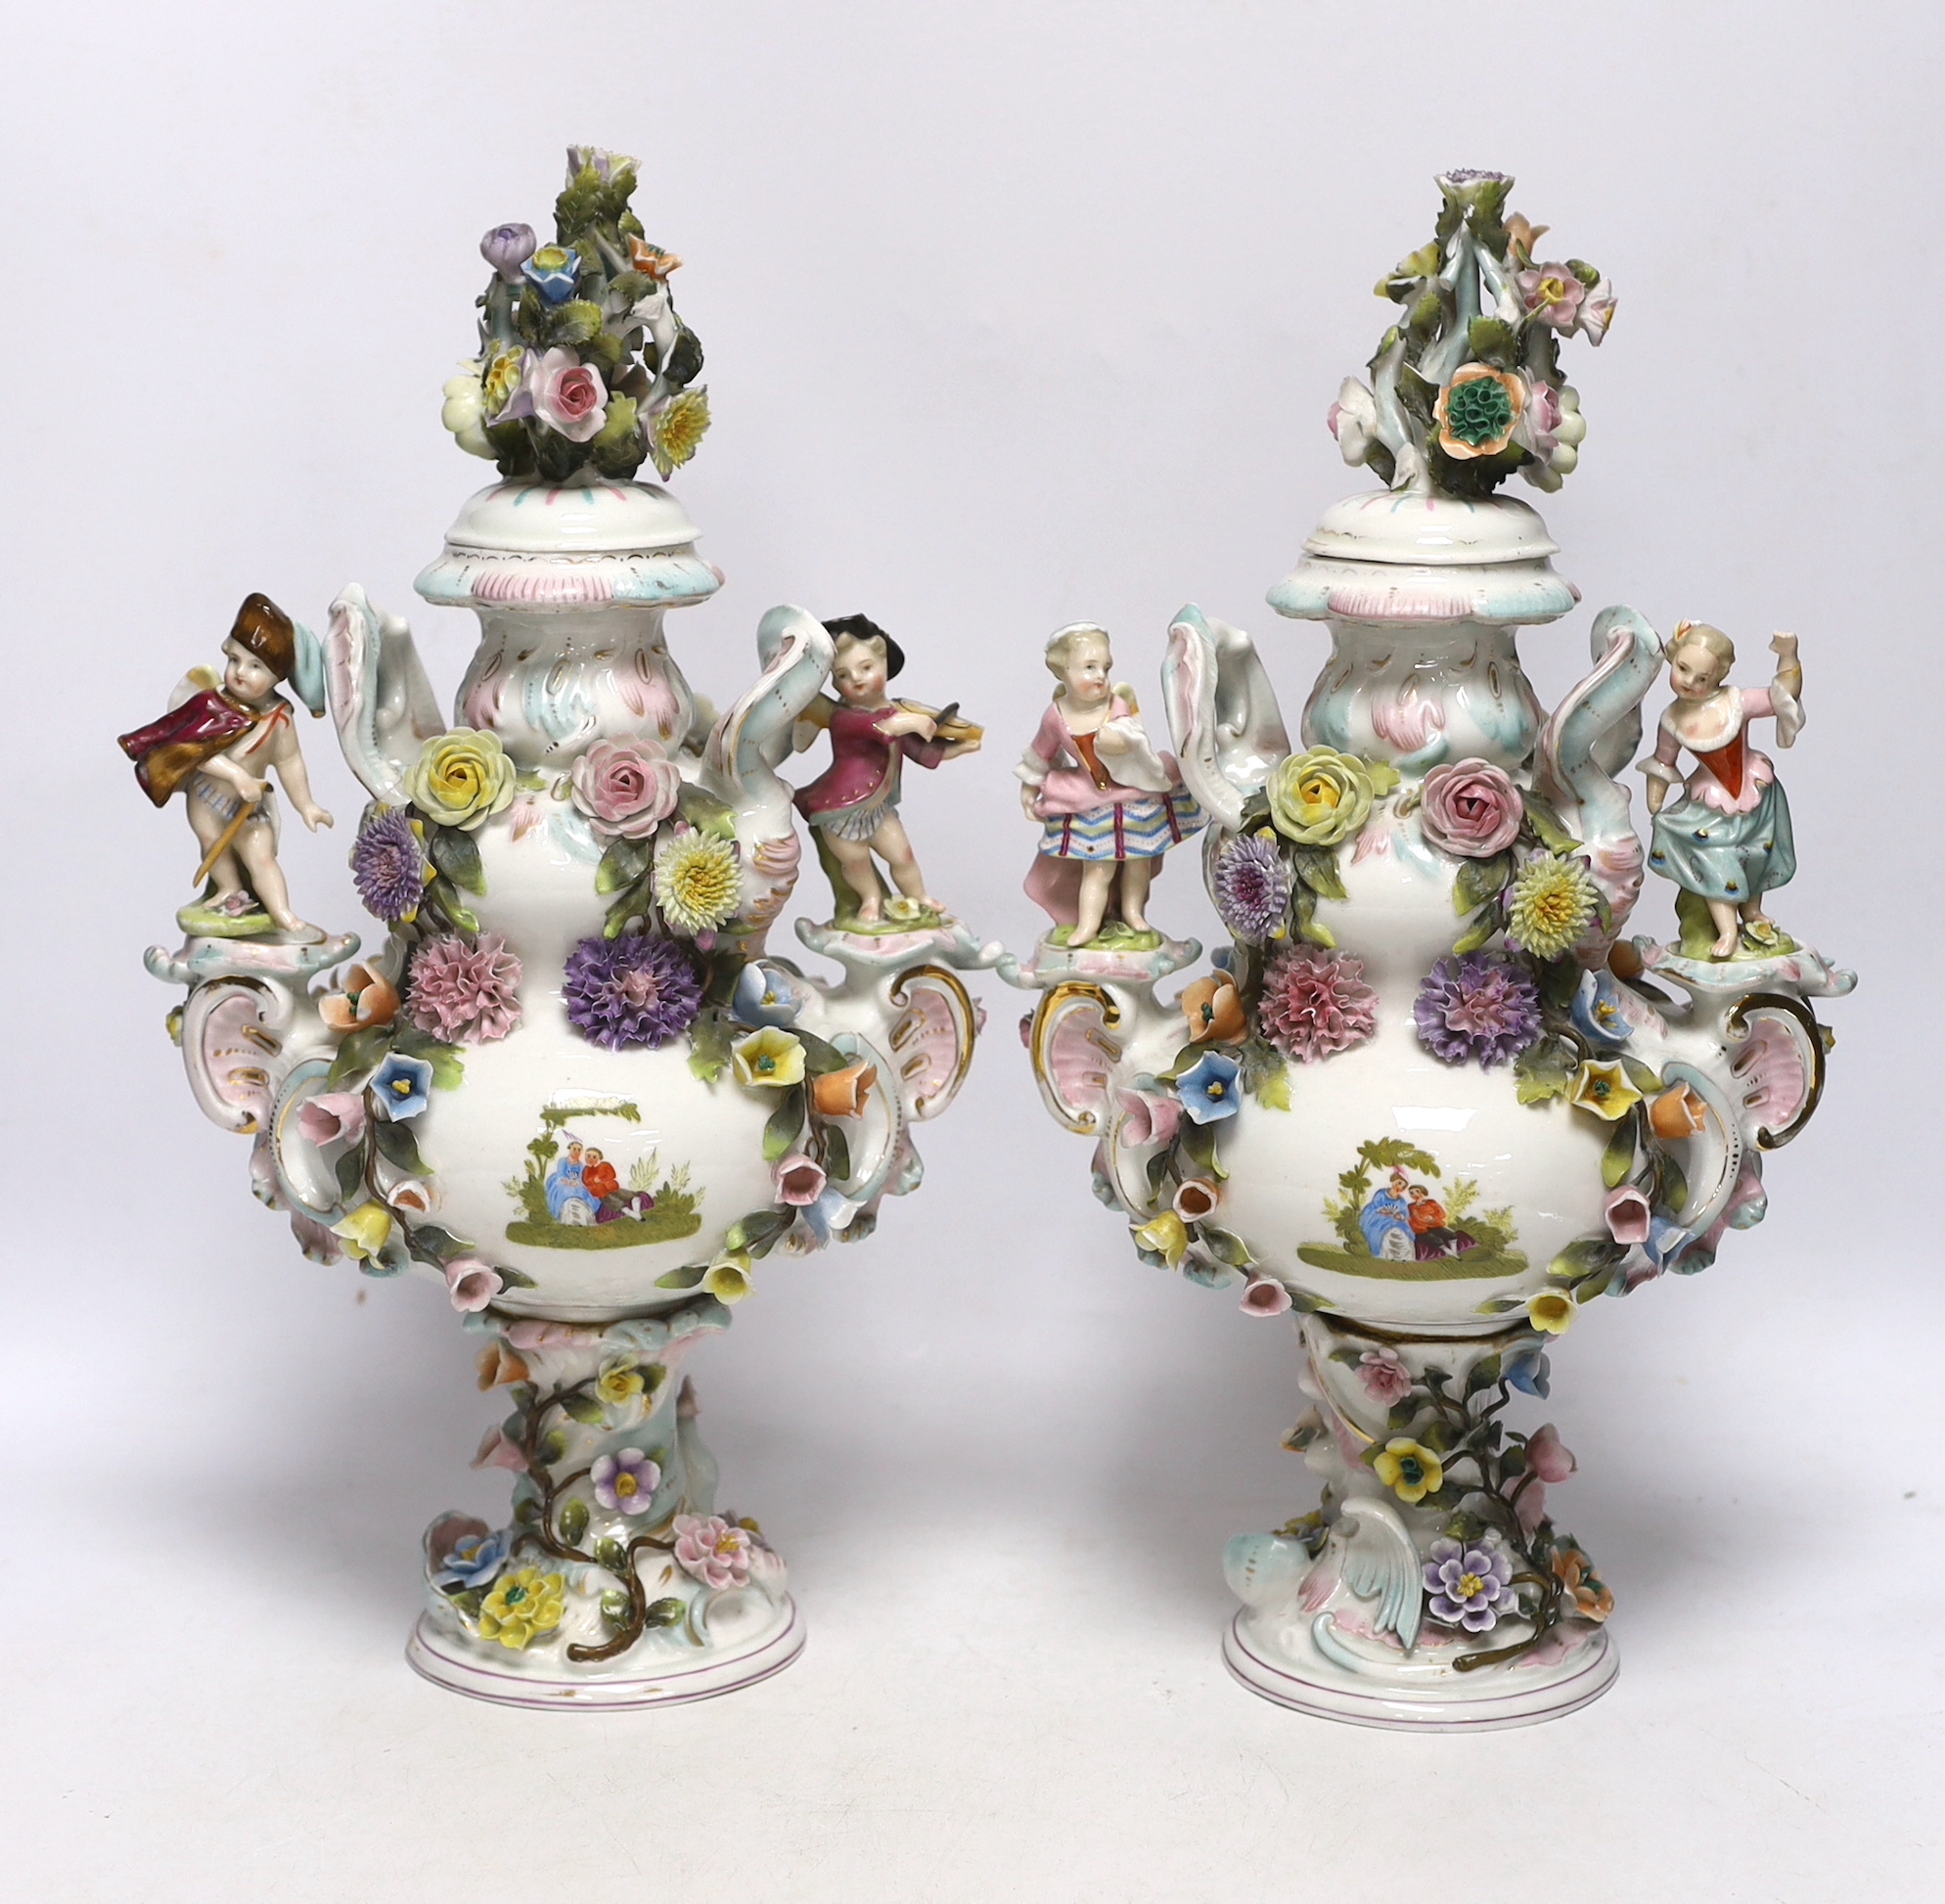 A pair of Sitzendorf floral encrusted and figural vases and covers, late 19th century, 36cm high